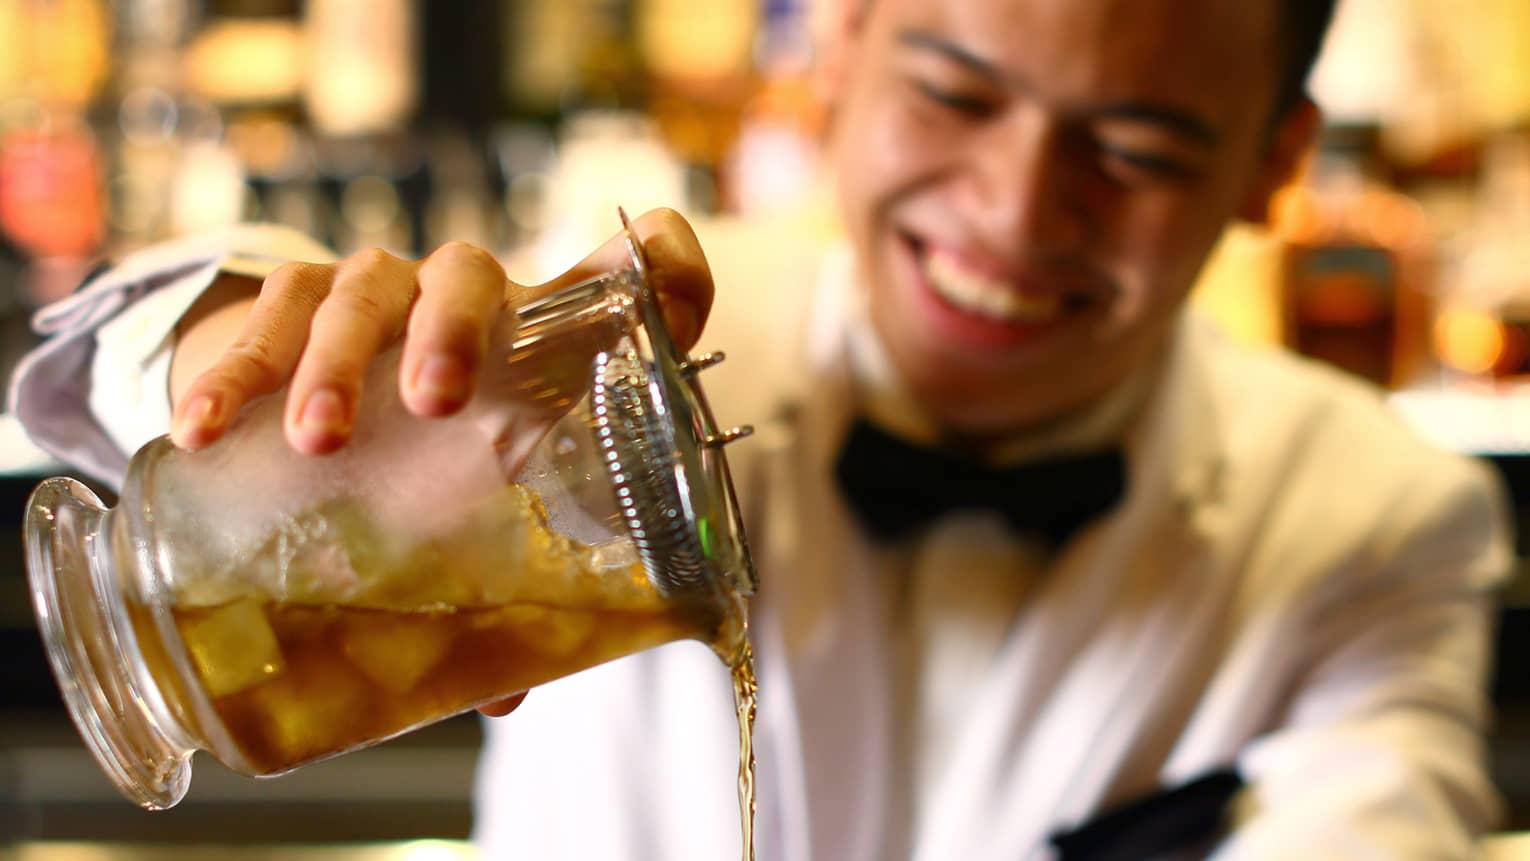 A bartender pours a drink at a Jakarta Hotel bar